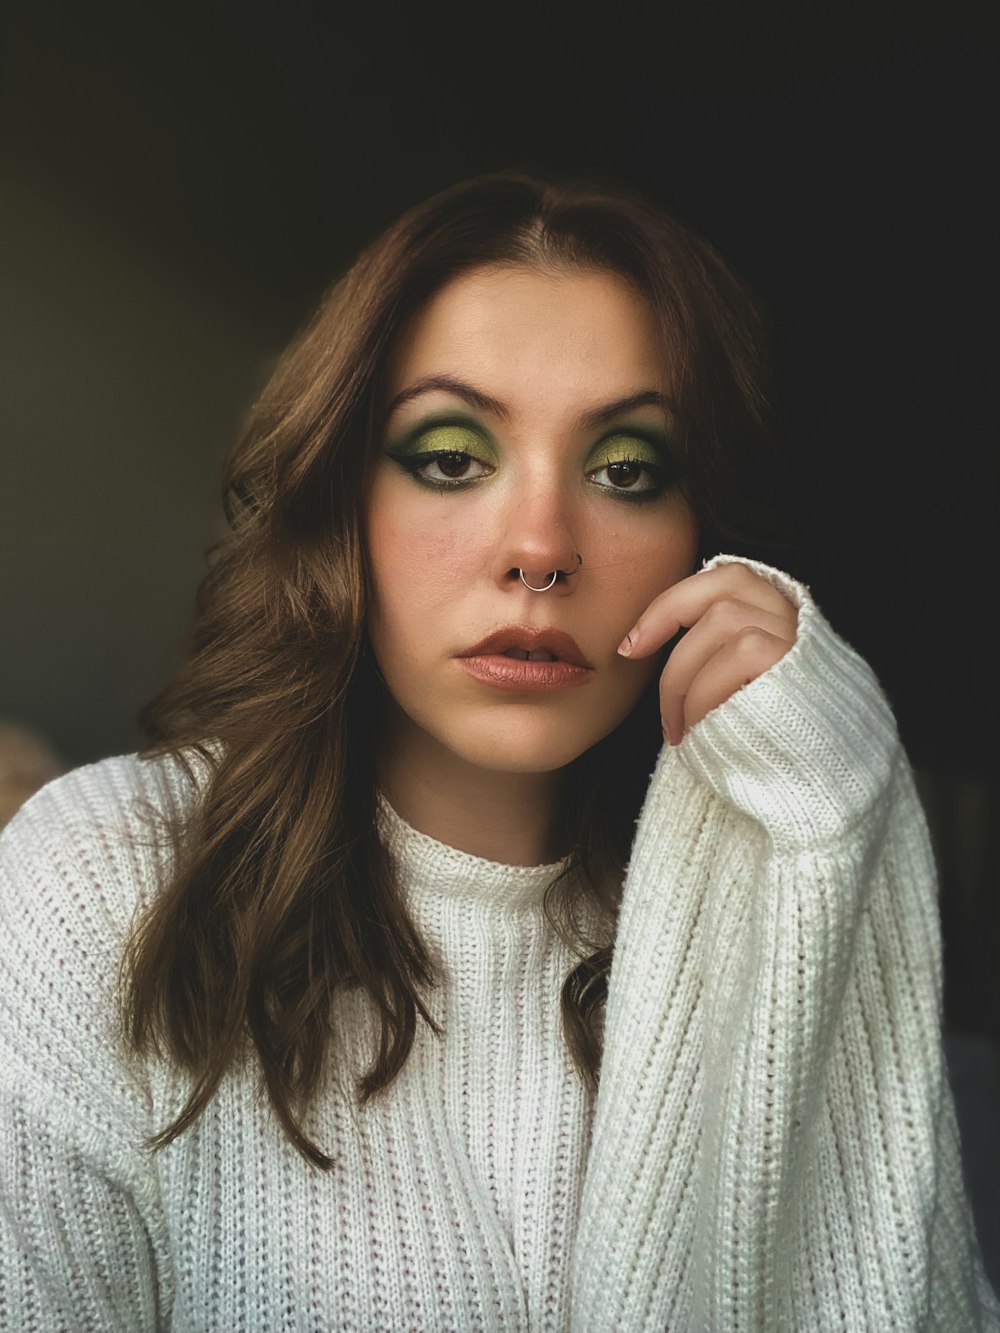 a woman with green eyes and a white sweater